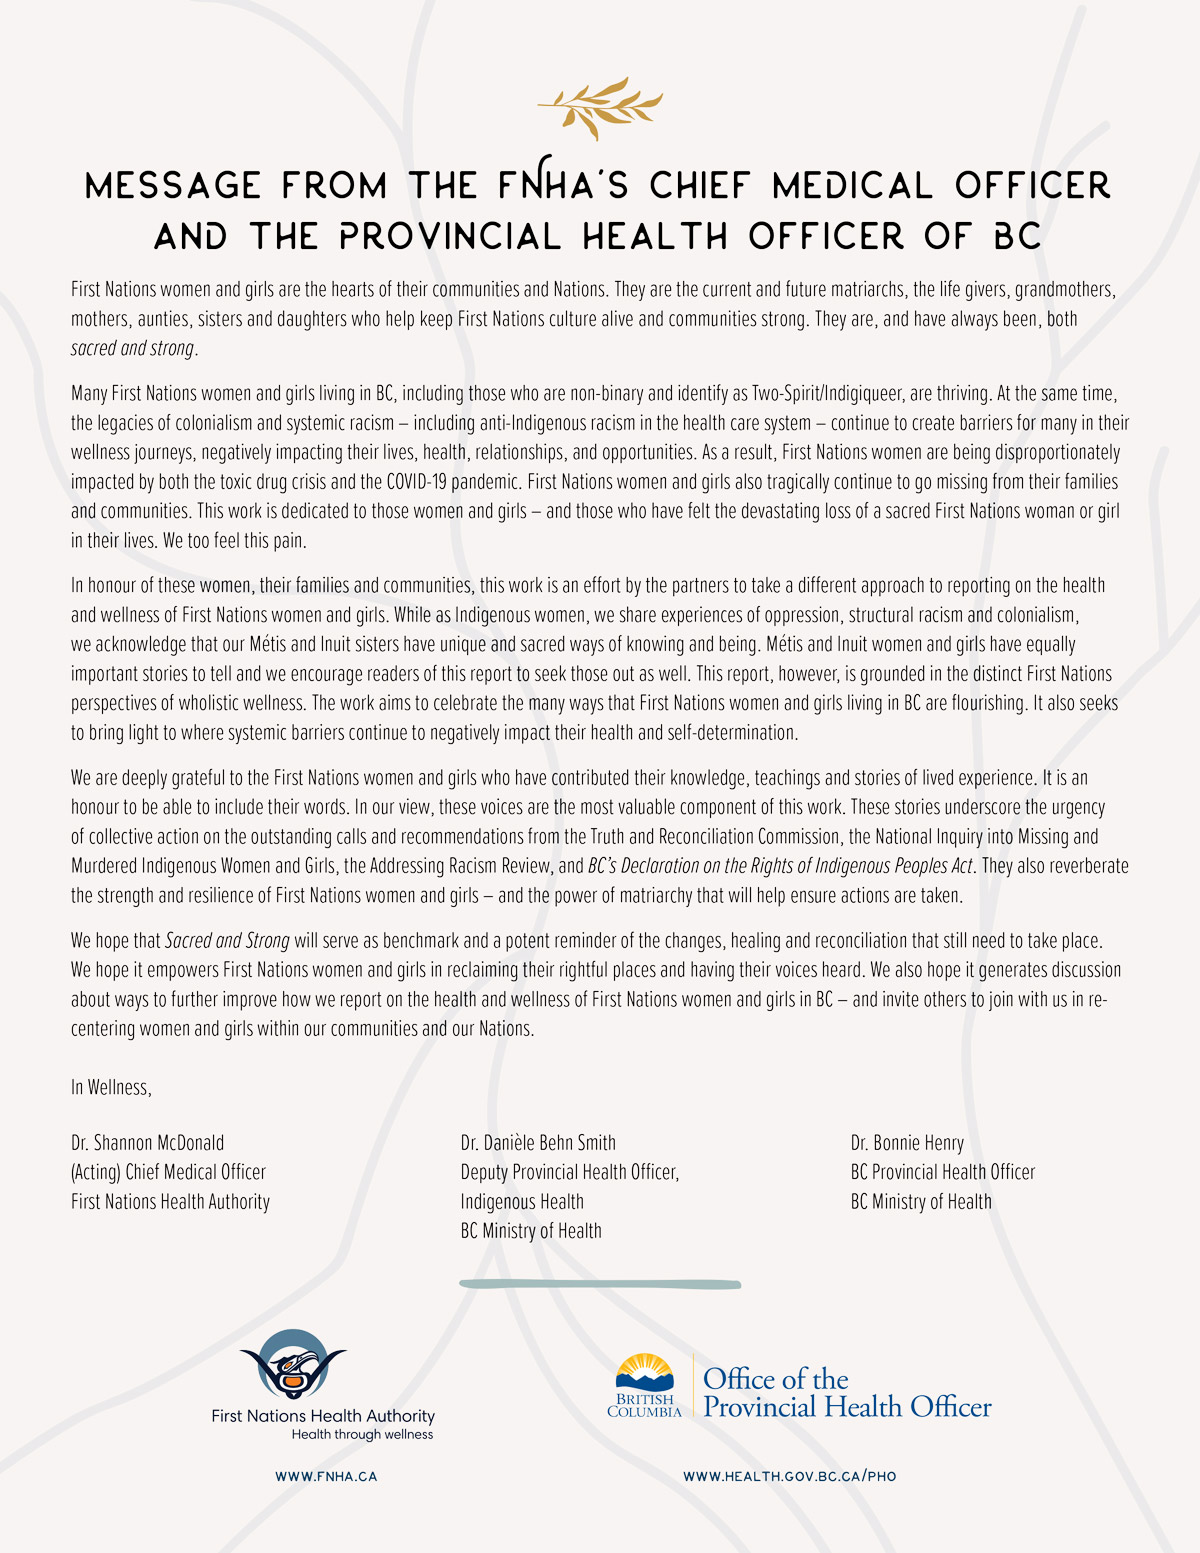 FNHA-PHO-Sacred-and-Strong-Letter.jpg